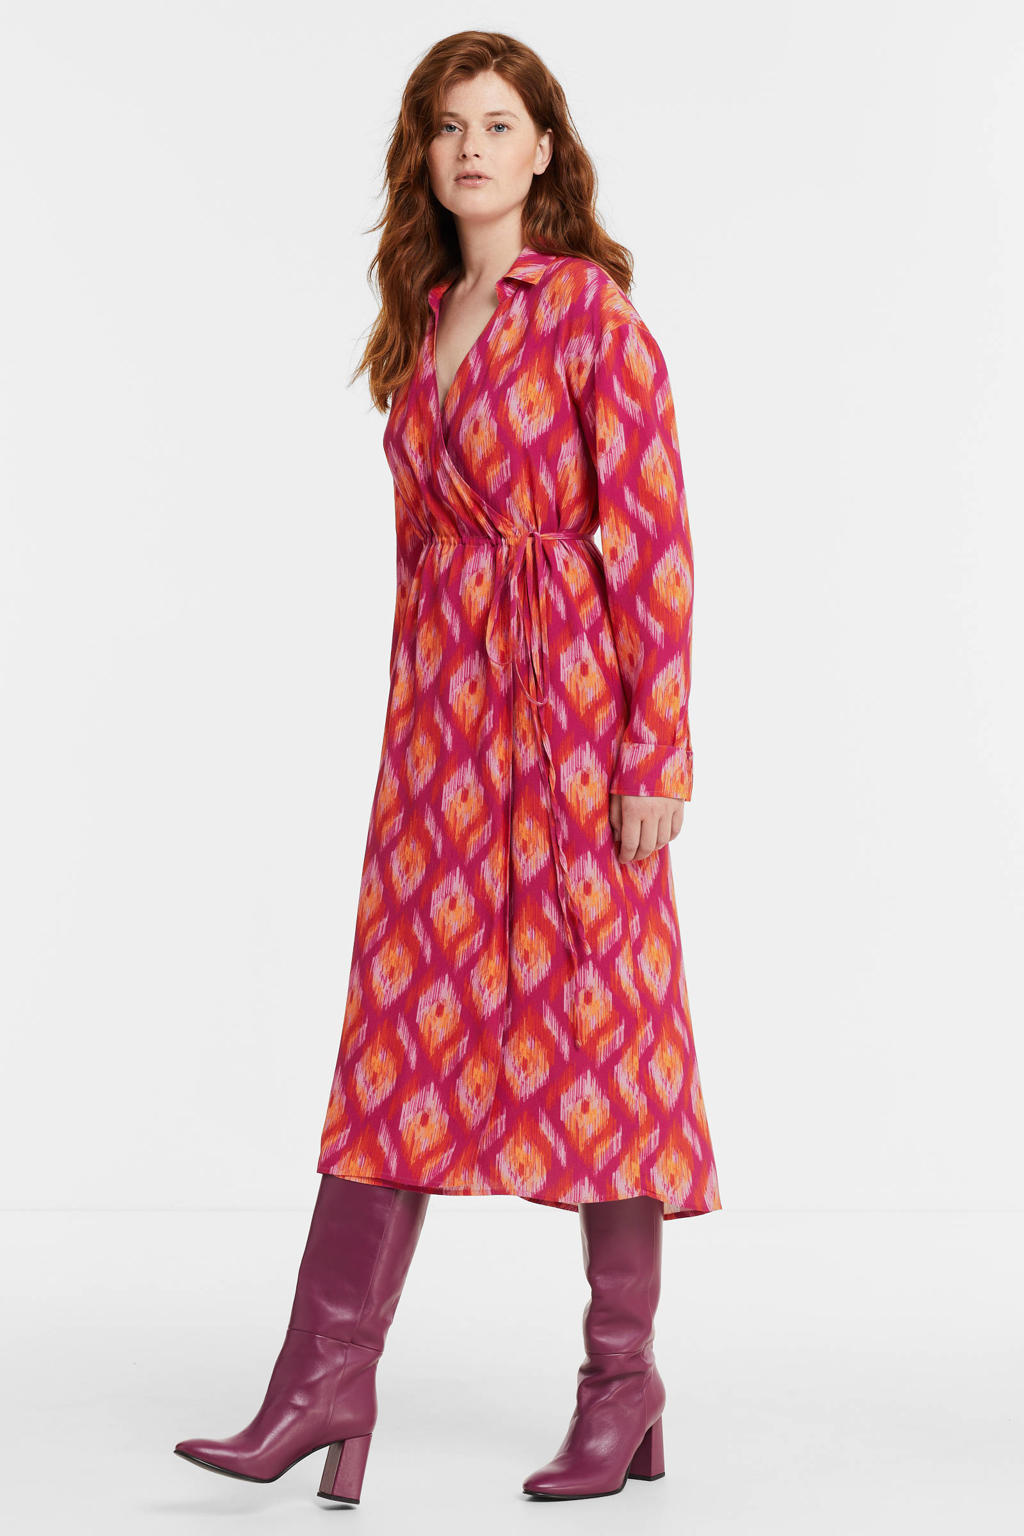 Ydence blousejurk Kate met all over print aztec